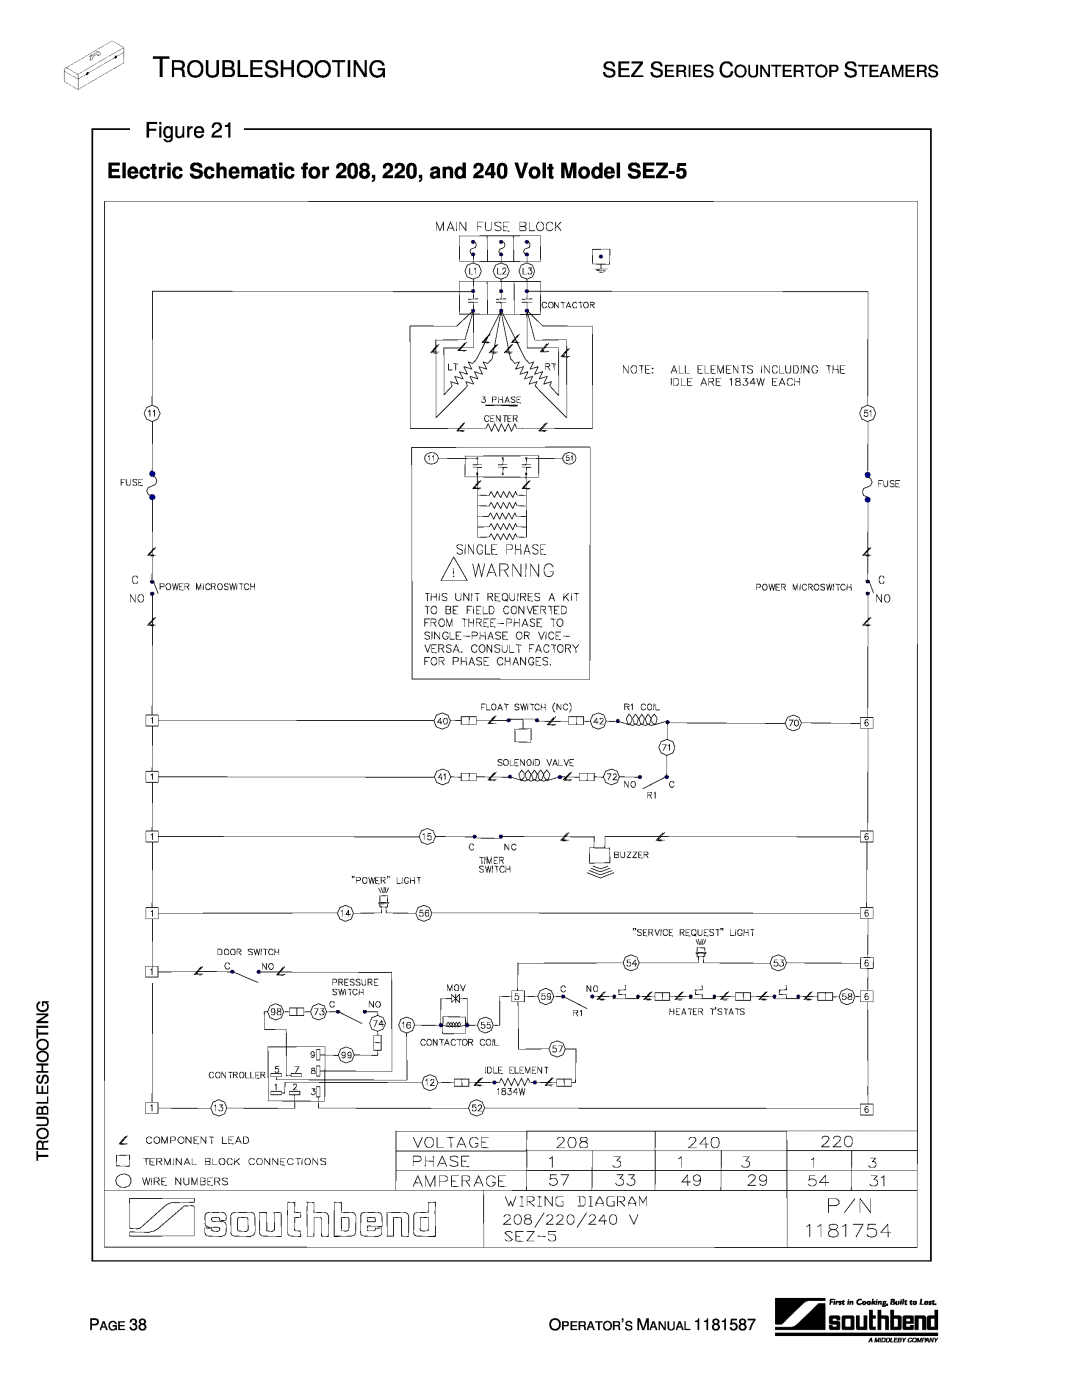 Southbend SEZ-3 manual Electric Schematic for 208, 220, and 240 Volt Model SEZ-5, Troubleshooting 